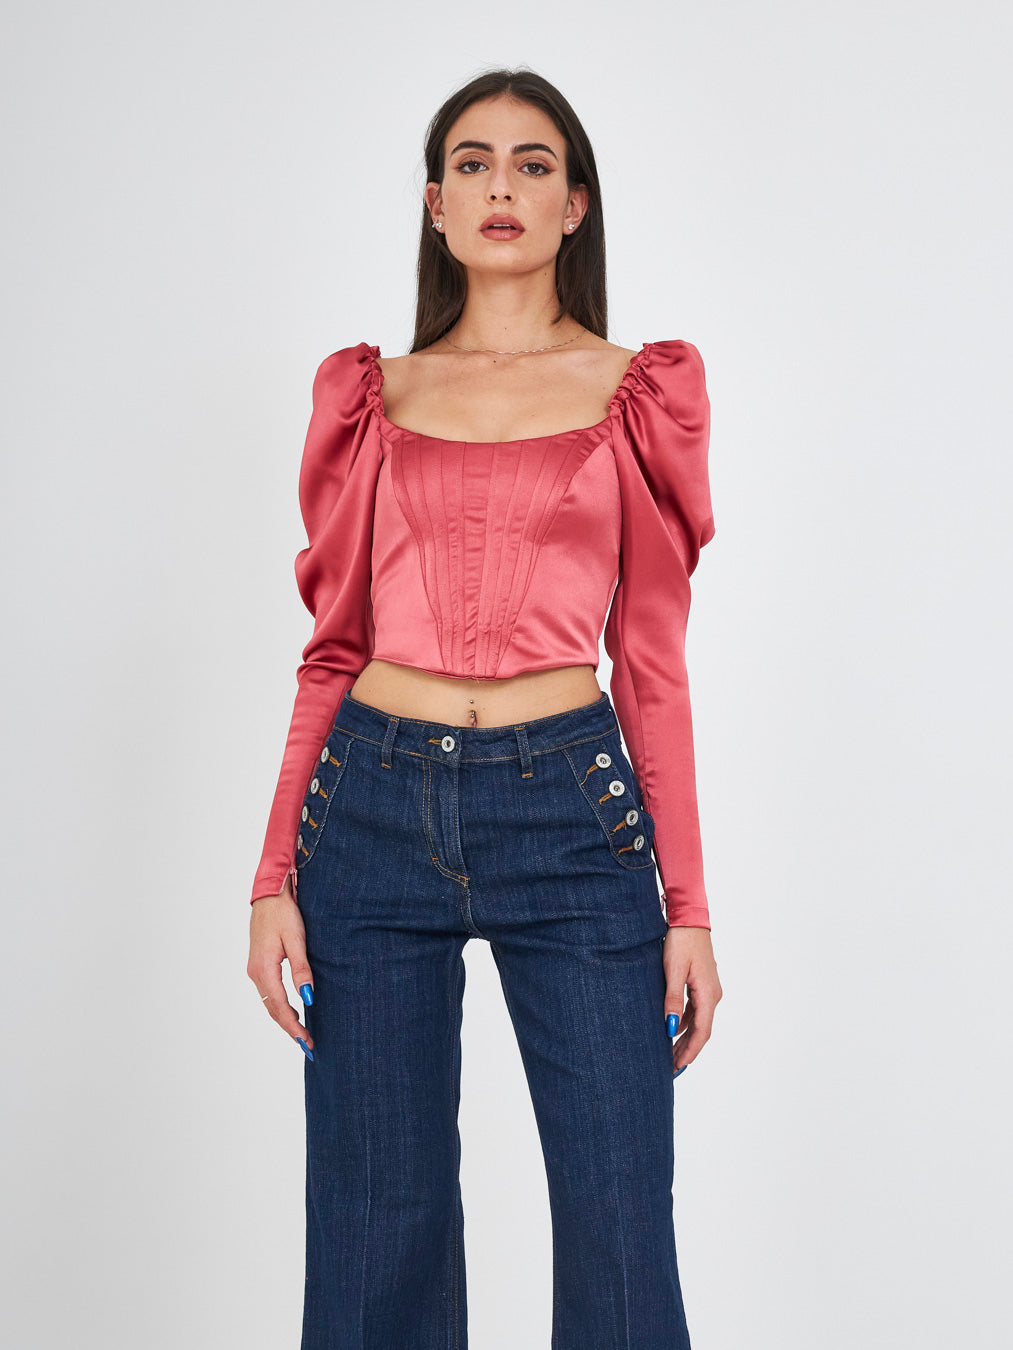 Matilde Couture pink top